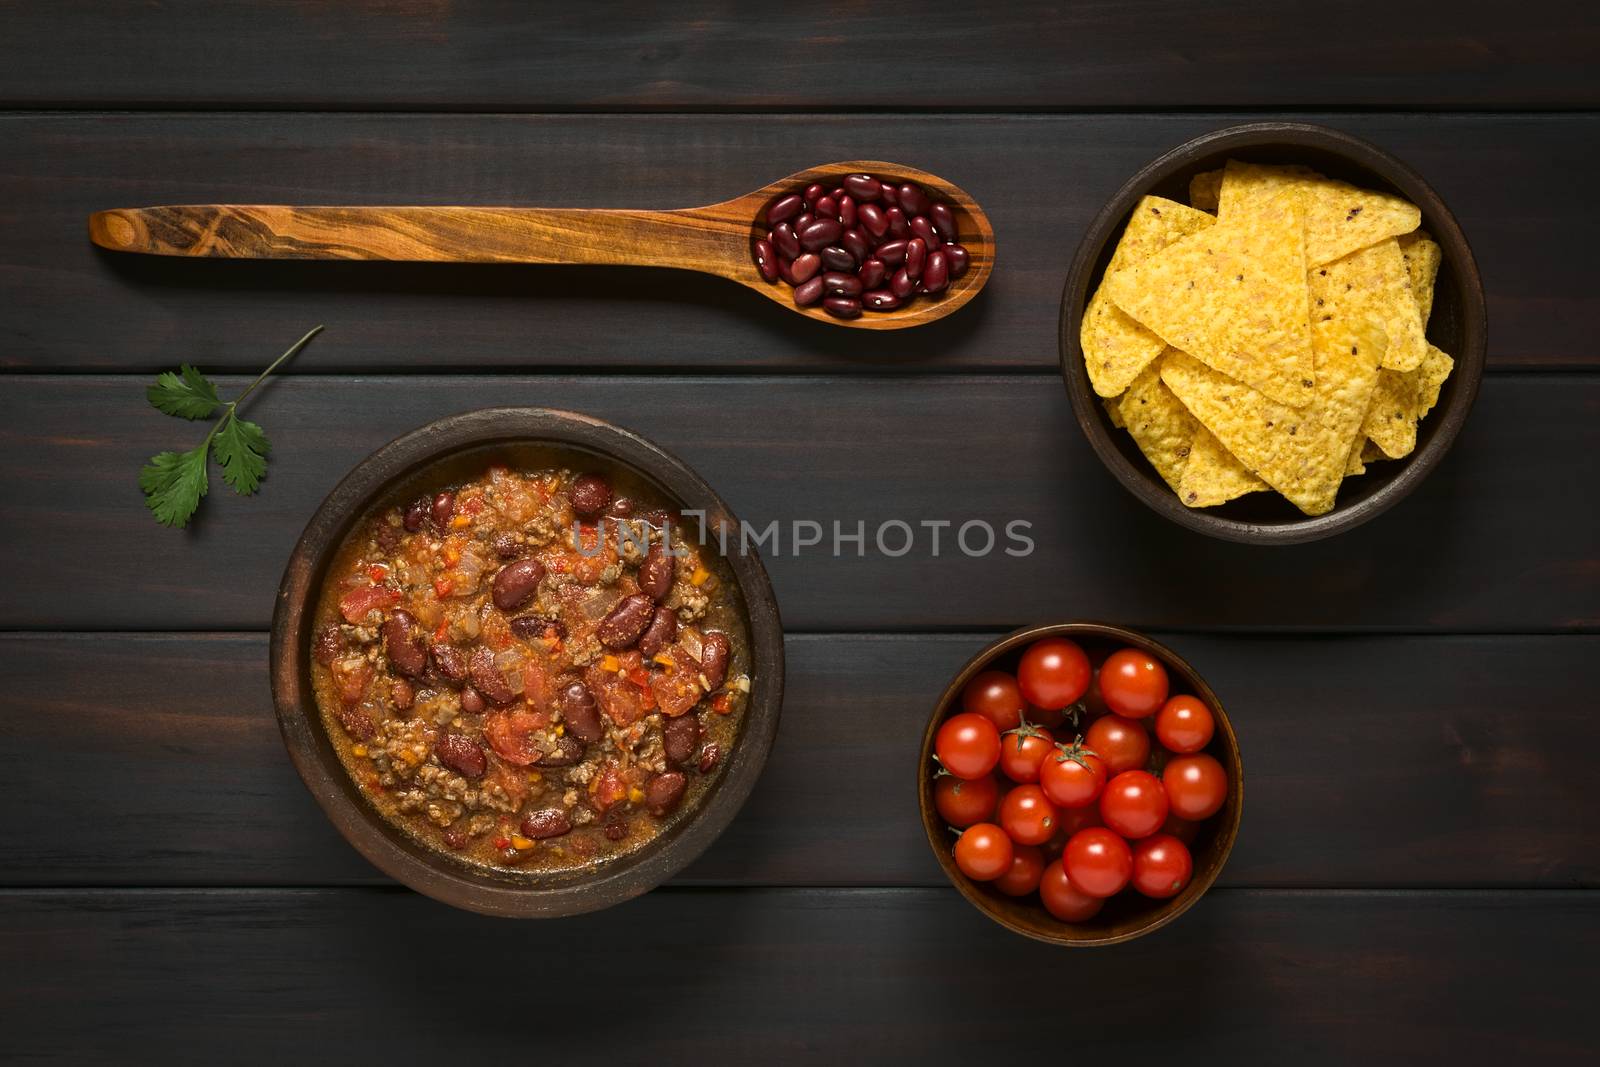 Overhead shot of chili con carne and tortilla chips with ingredients dried kidney beans and cherry tomatoes, photographed on dark wood with natural light